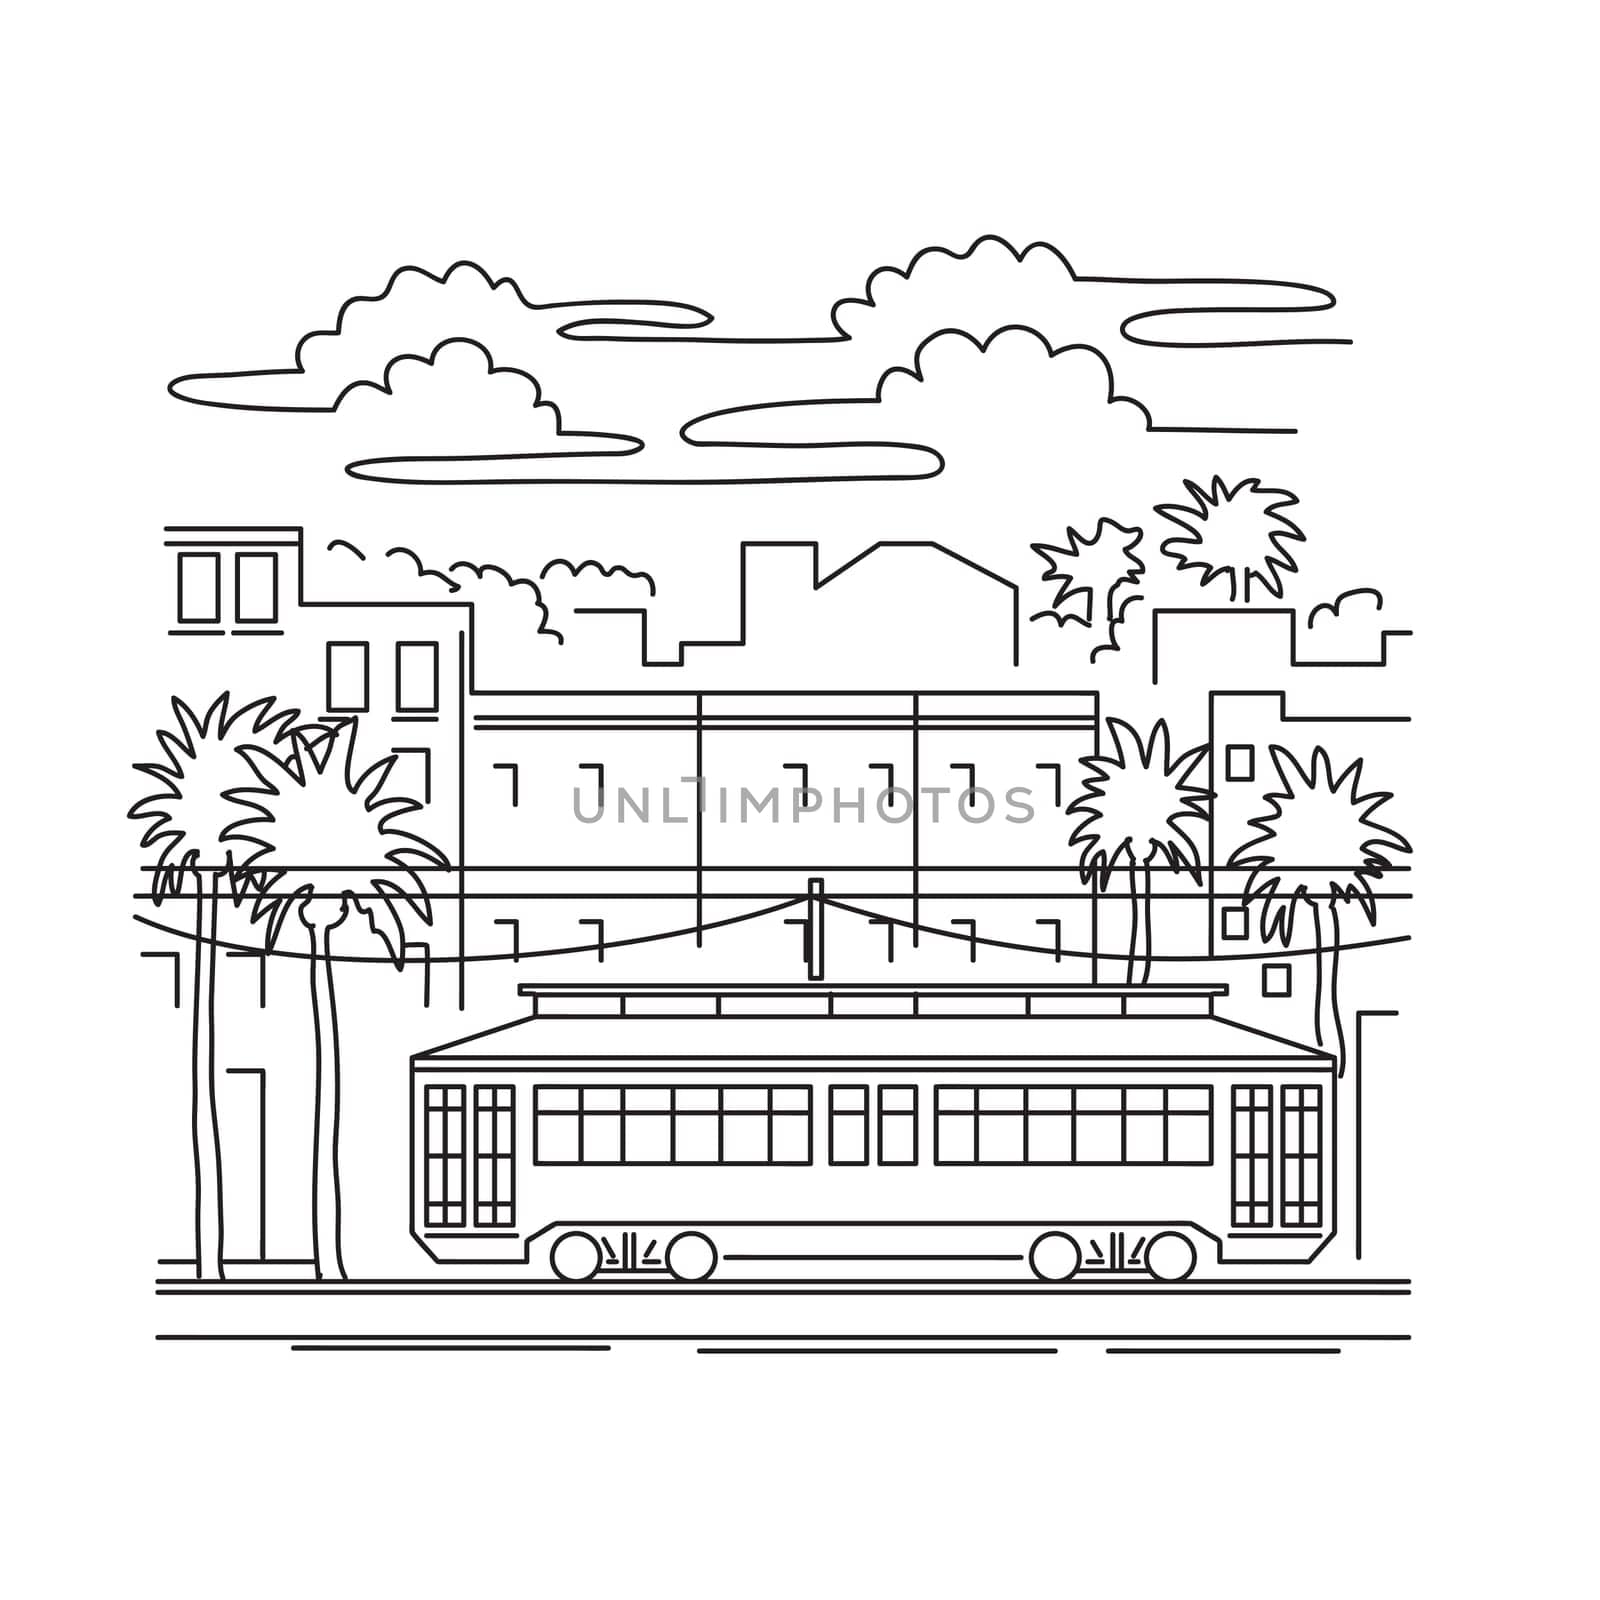 Mono line illustration of a streetcar or trolley car in New Orleans, Louisiana, USA done in monoline line art black and white style.
